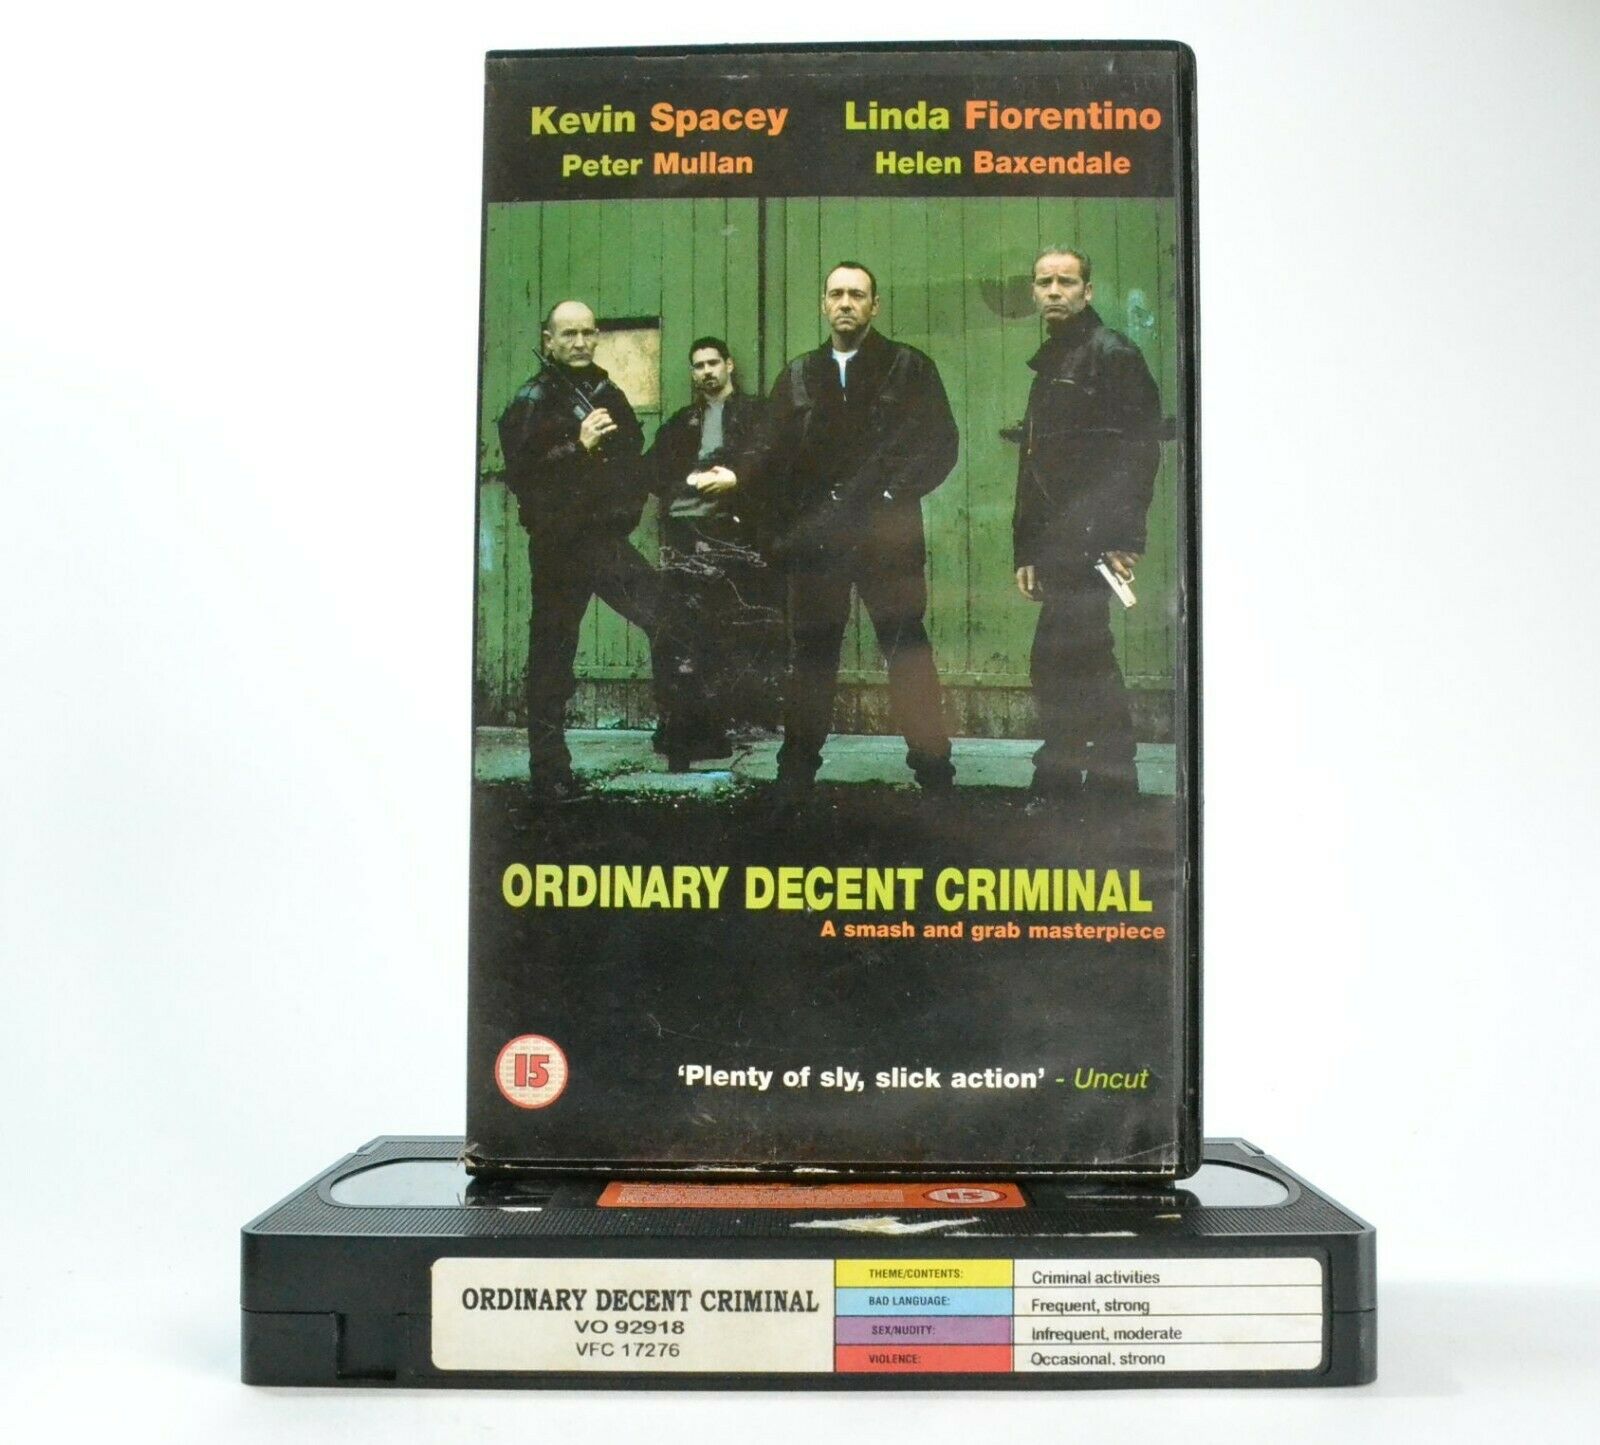 Ordinary Decent Criminal: Crime Comedy - Irish Crime Boss - Kevin Spacey - VHS-